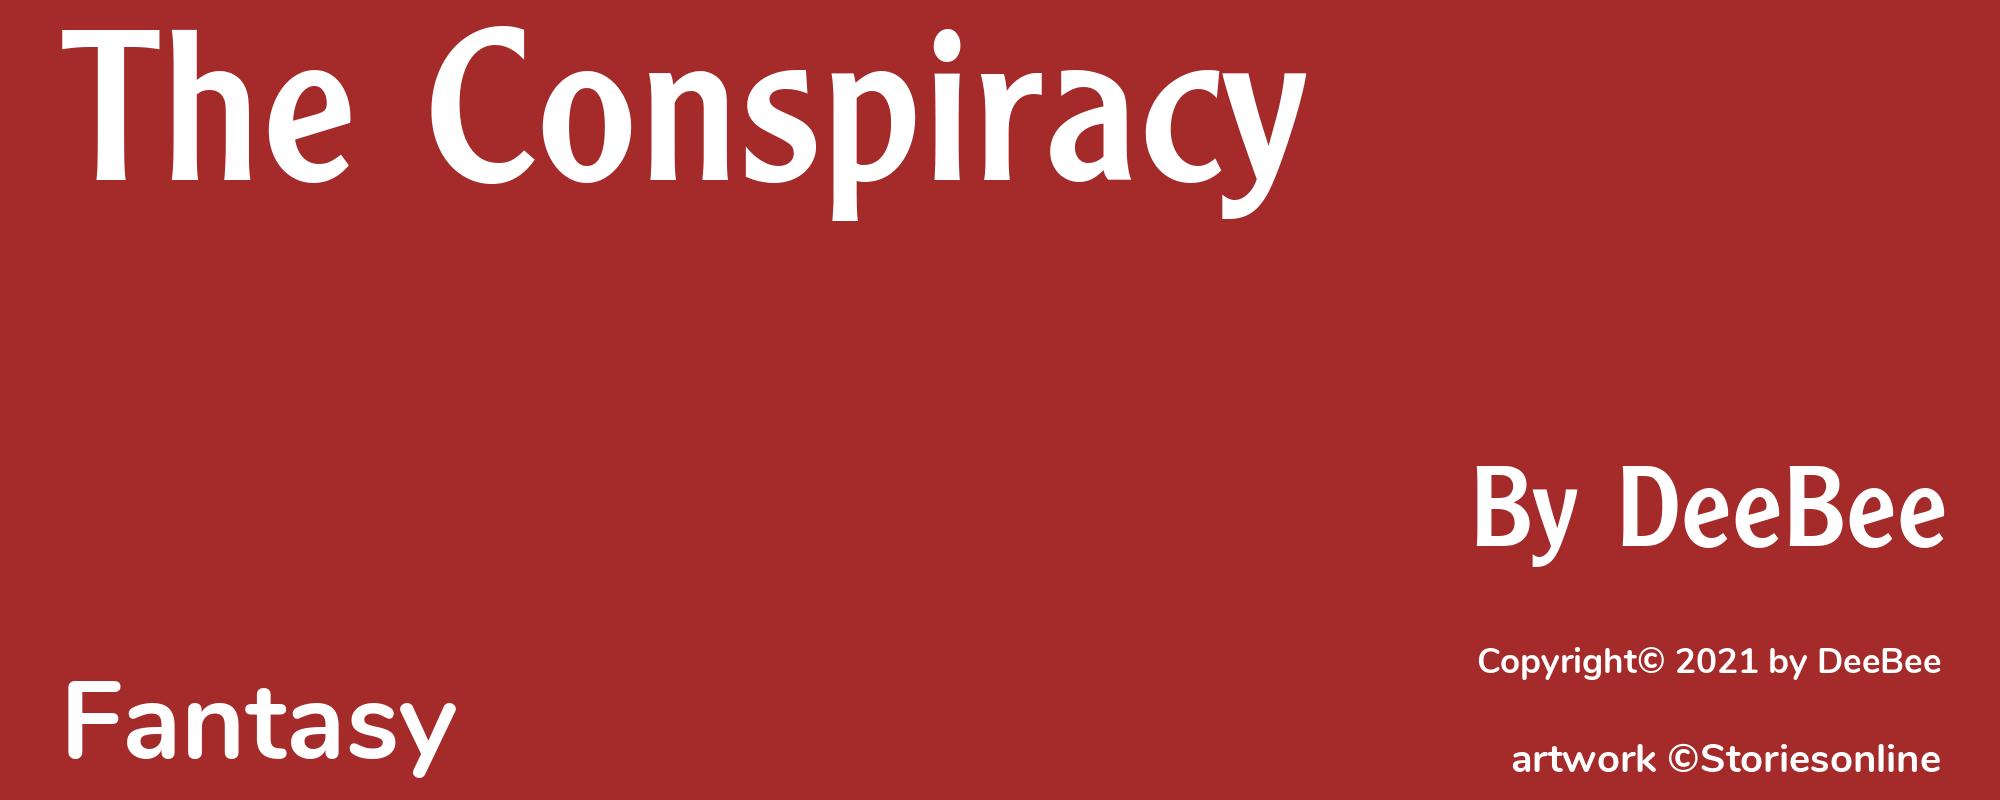 The Conspiracy - Cover